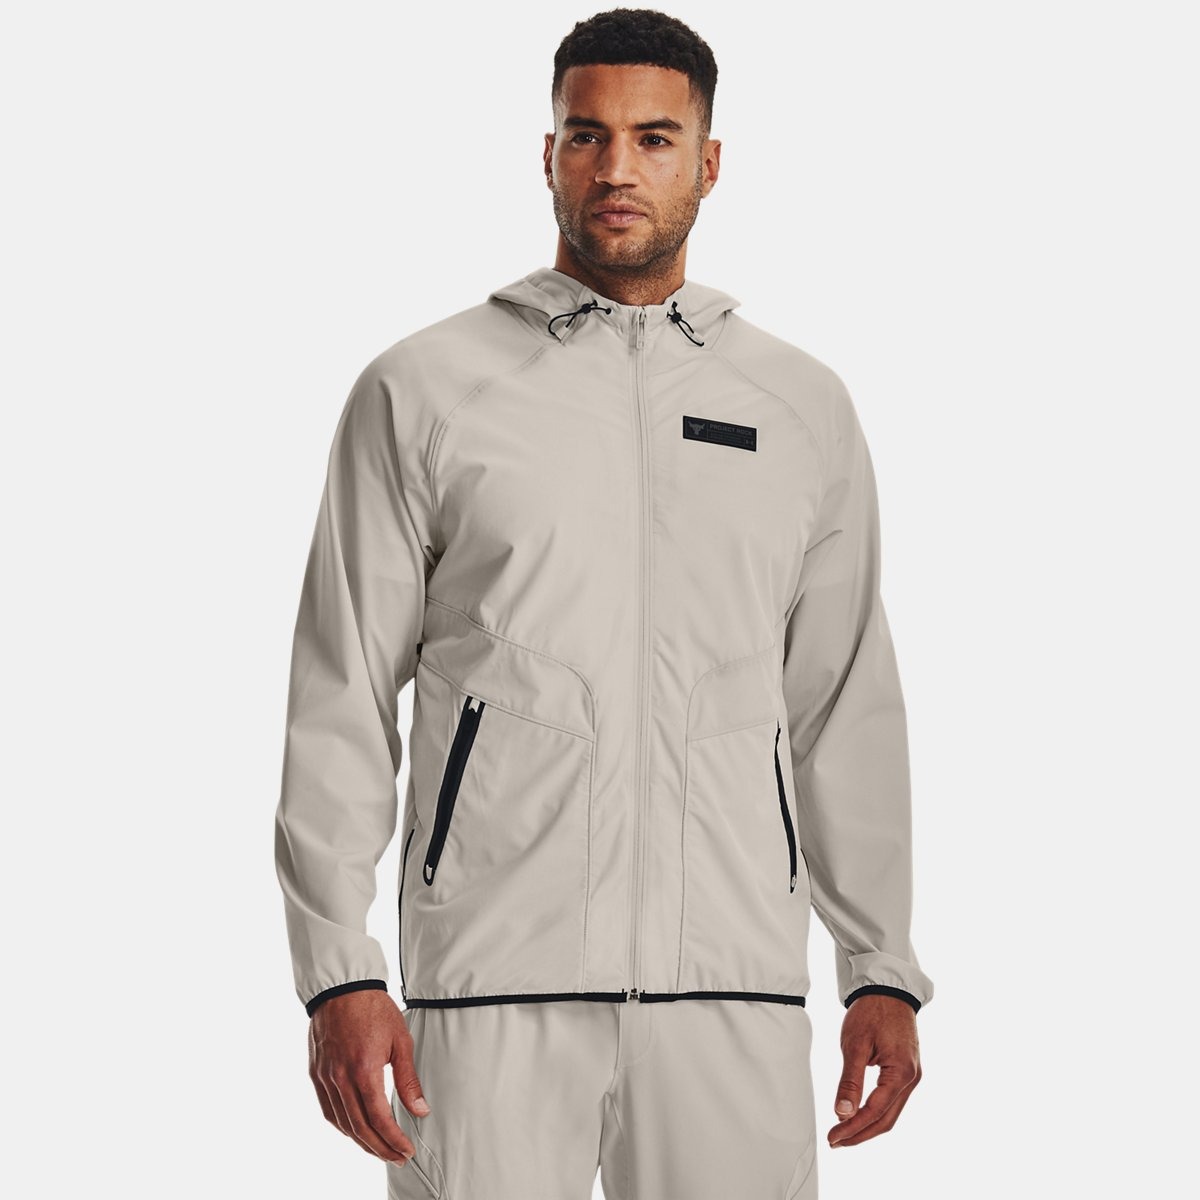 Gents Jacket in Grey by Under Armour GOOFASH